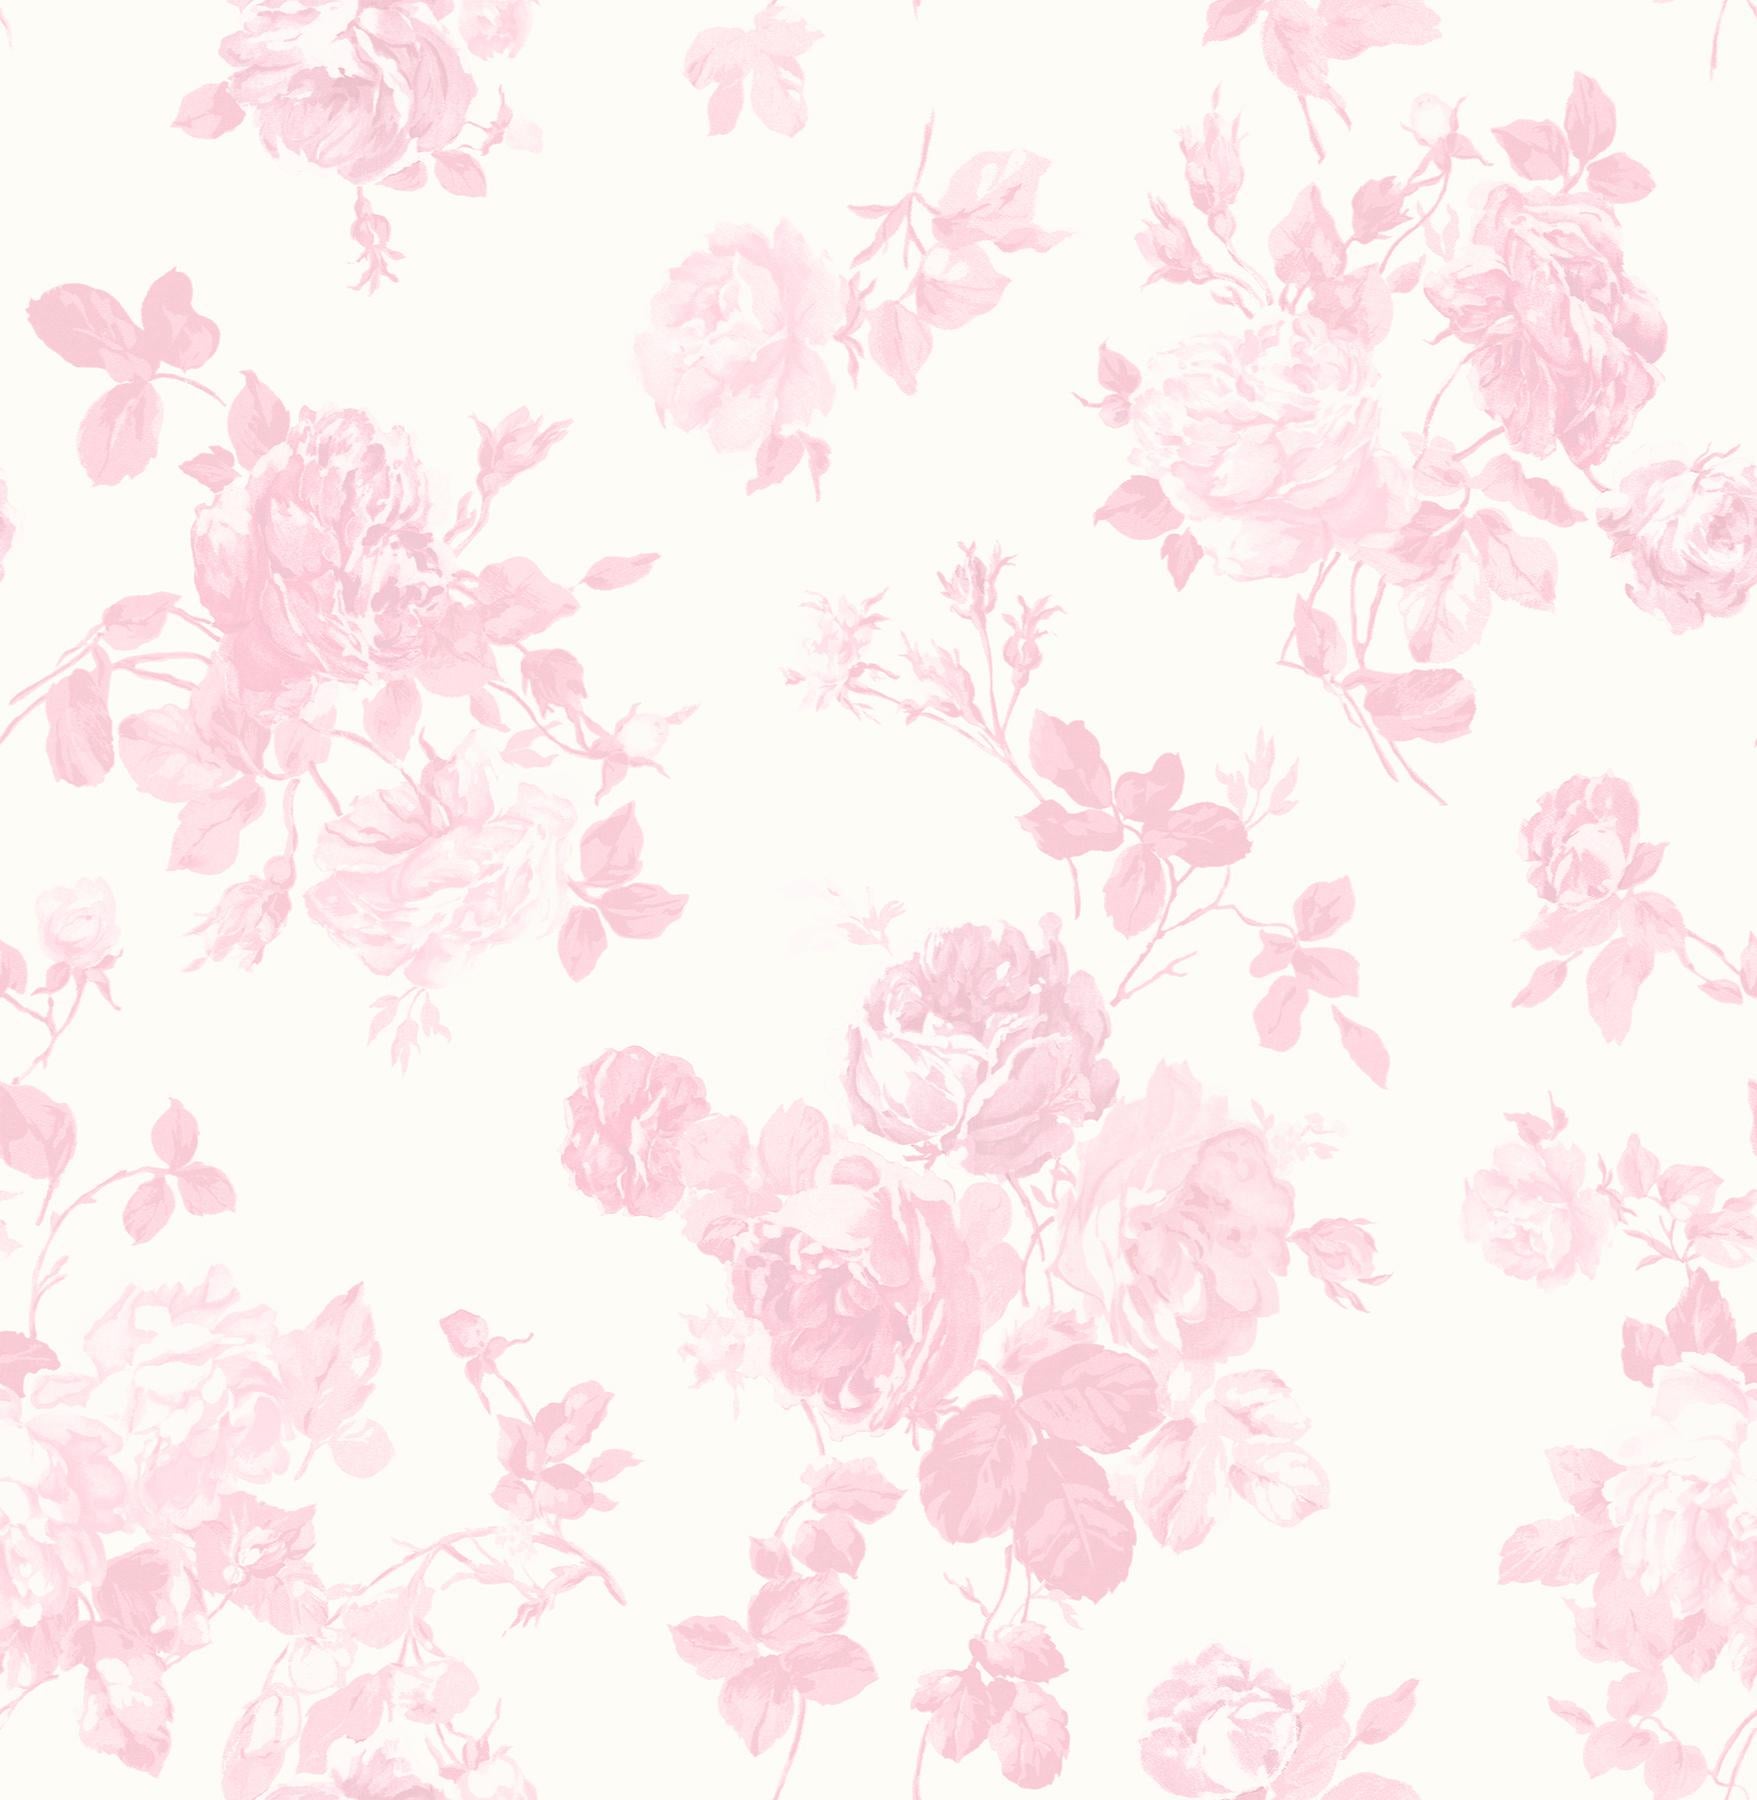 In A Field Of Roses Fabric, Wallpaper and Home Decor, In A Field